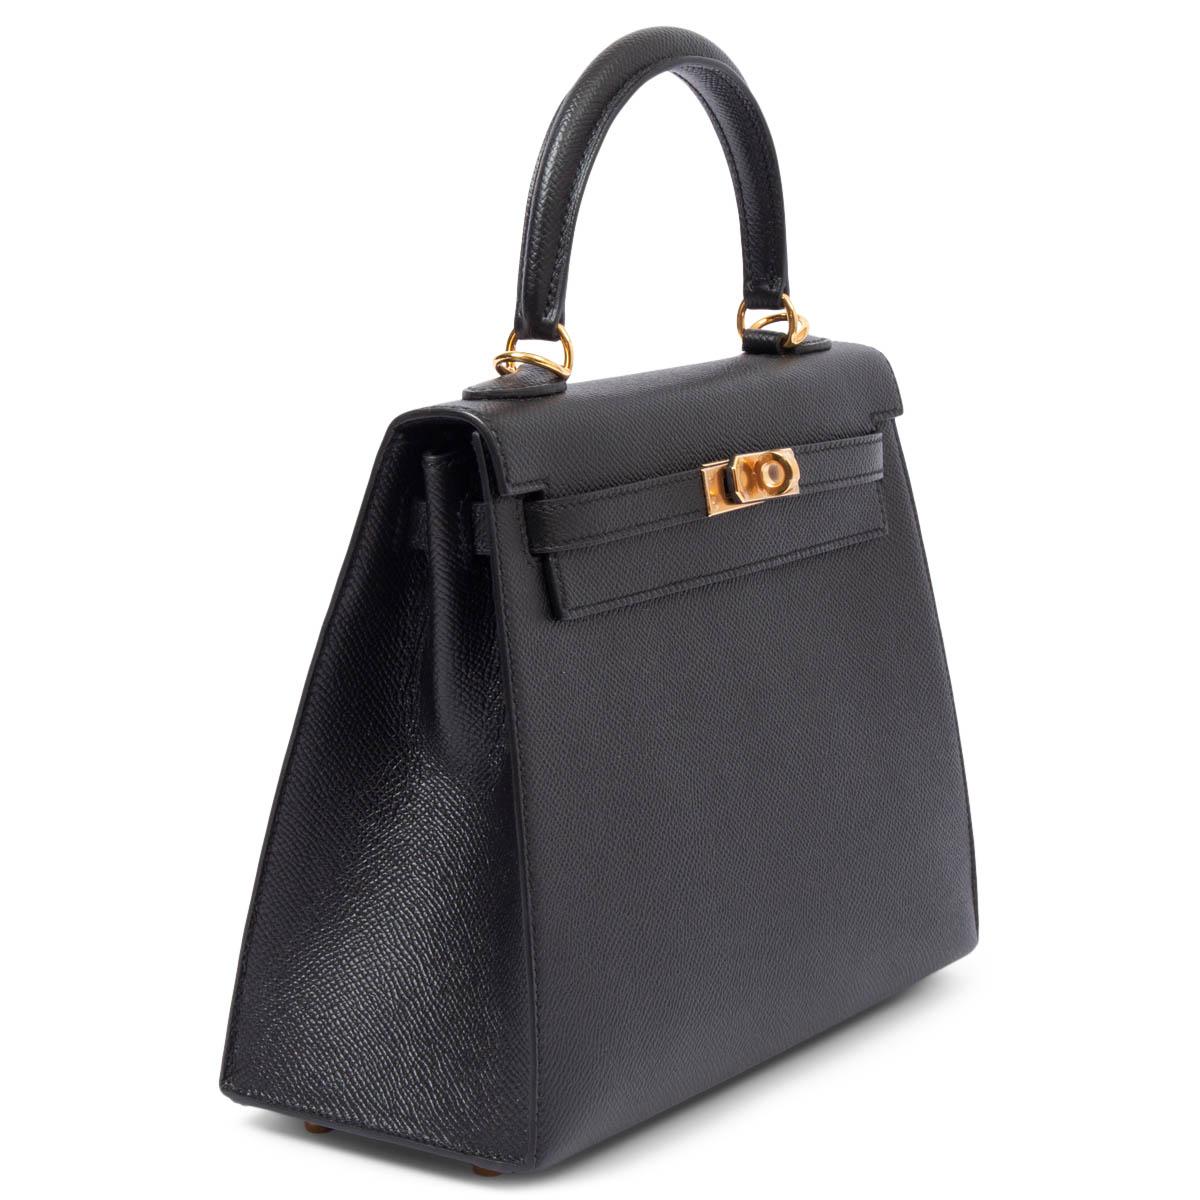 100% authentic Hermès Kelly 25 Sellier bag in Noir (black) Veau Epsom leather with gold-plated hardware. Lined in Chevre (goat skin) with an open pocket against the front and a zipper pocket against the back. New - Comes with full set except the